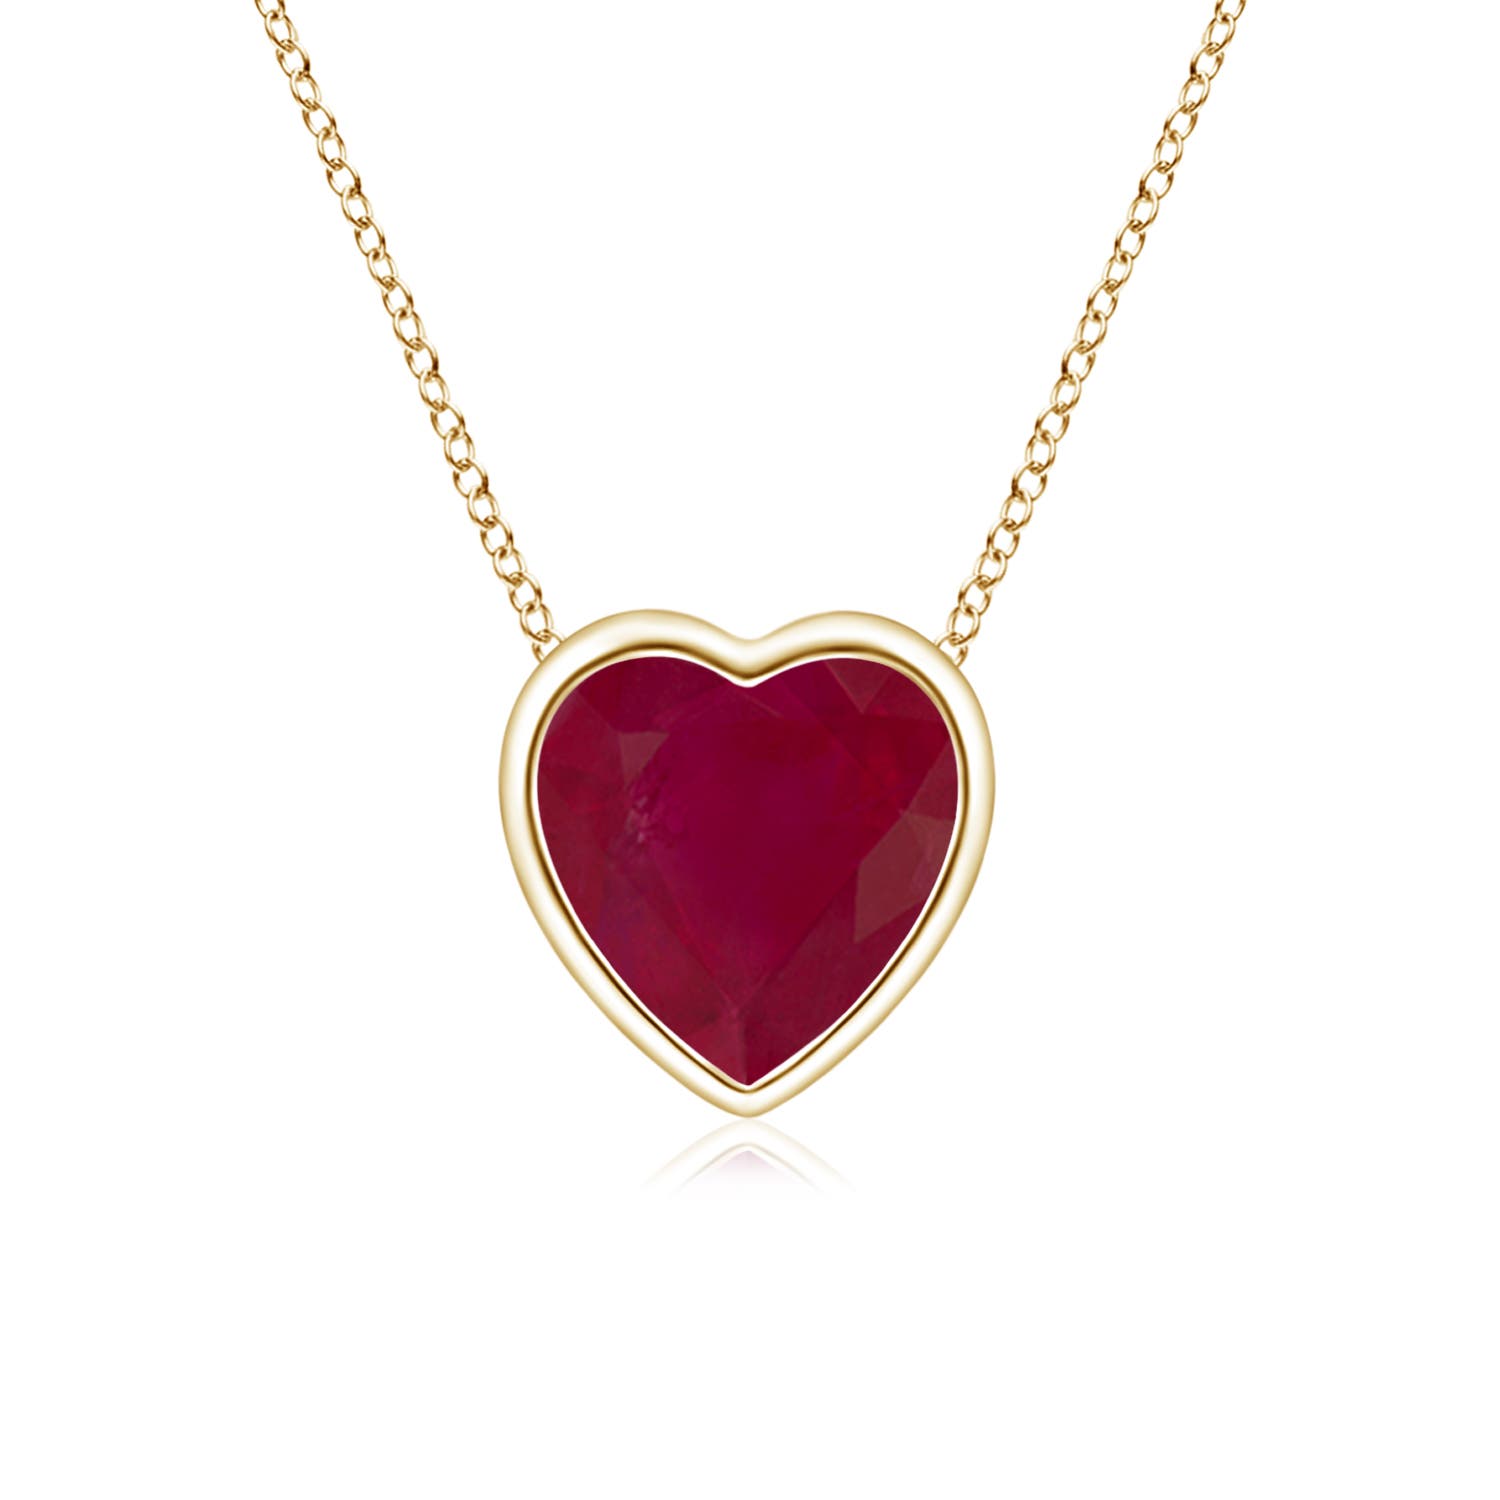 A - Ruby / 0.55 CT / 14 KT Yellow Gold